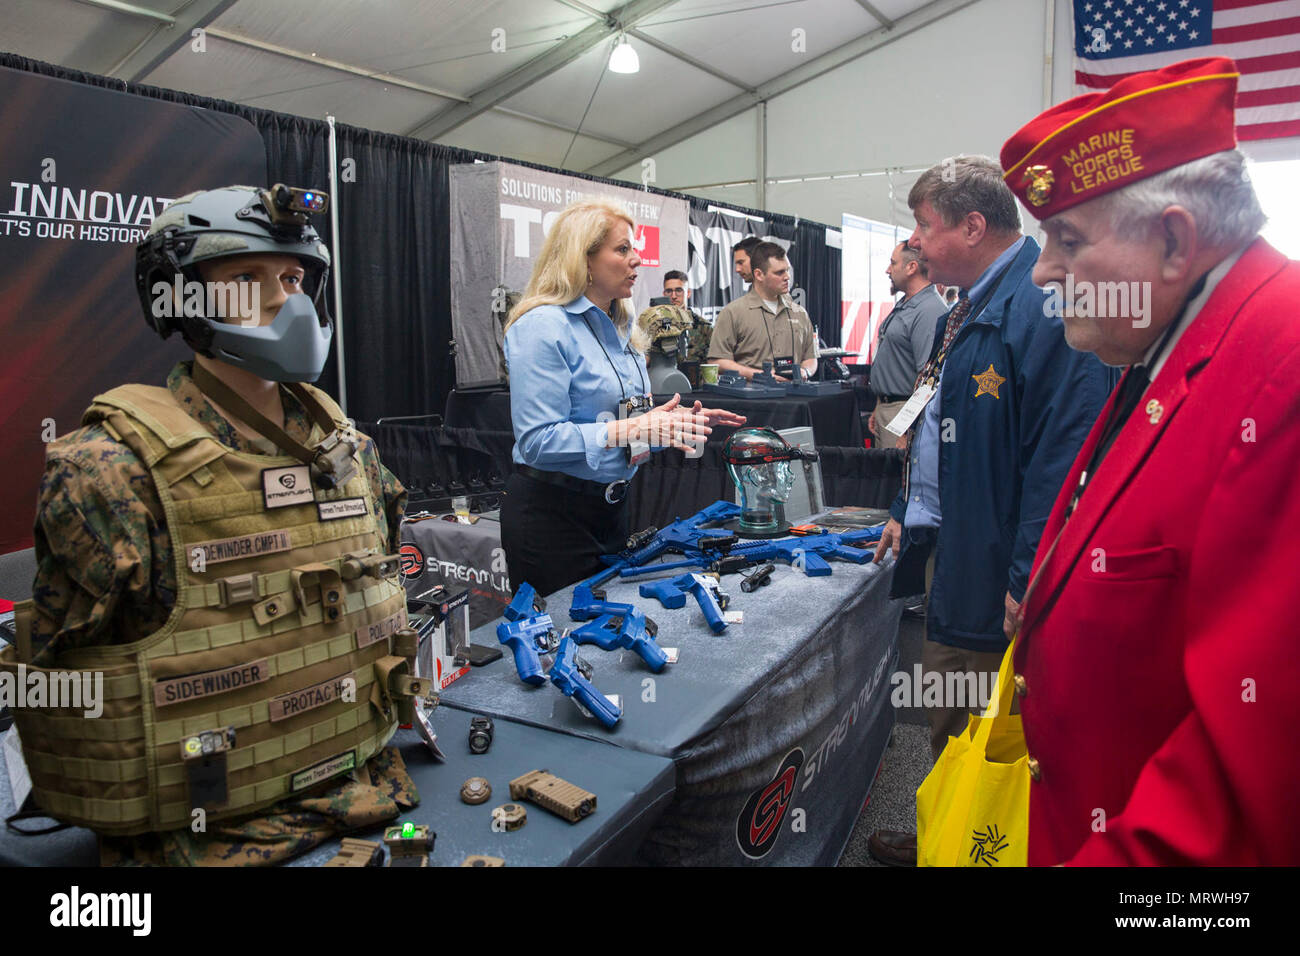 Sherry Lyons, regional military and federal division sales manager for Streamlight Inc., speaks with spectators about the display of weapons during the Marine South Military Exposition, Goettege Field House, Camp Lejeune N.C., April 13, 2017. The Marine South Exposition is sponsored by the Marine Corps League and is a forum for defense contractors to display, inform, and promote the latest in defense equipment and technology. Stock Photo